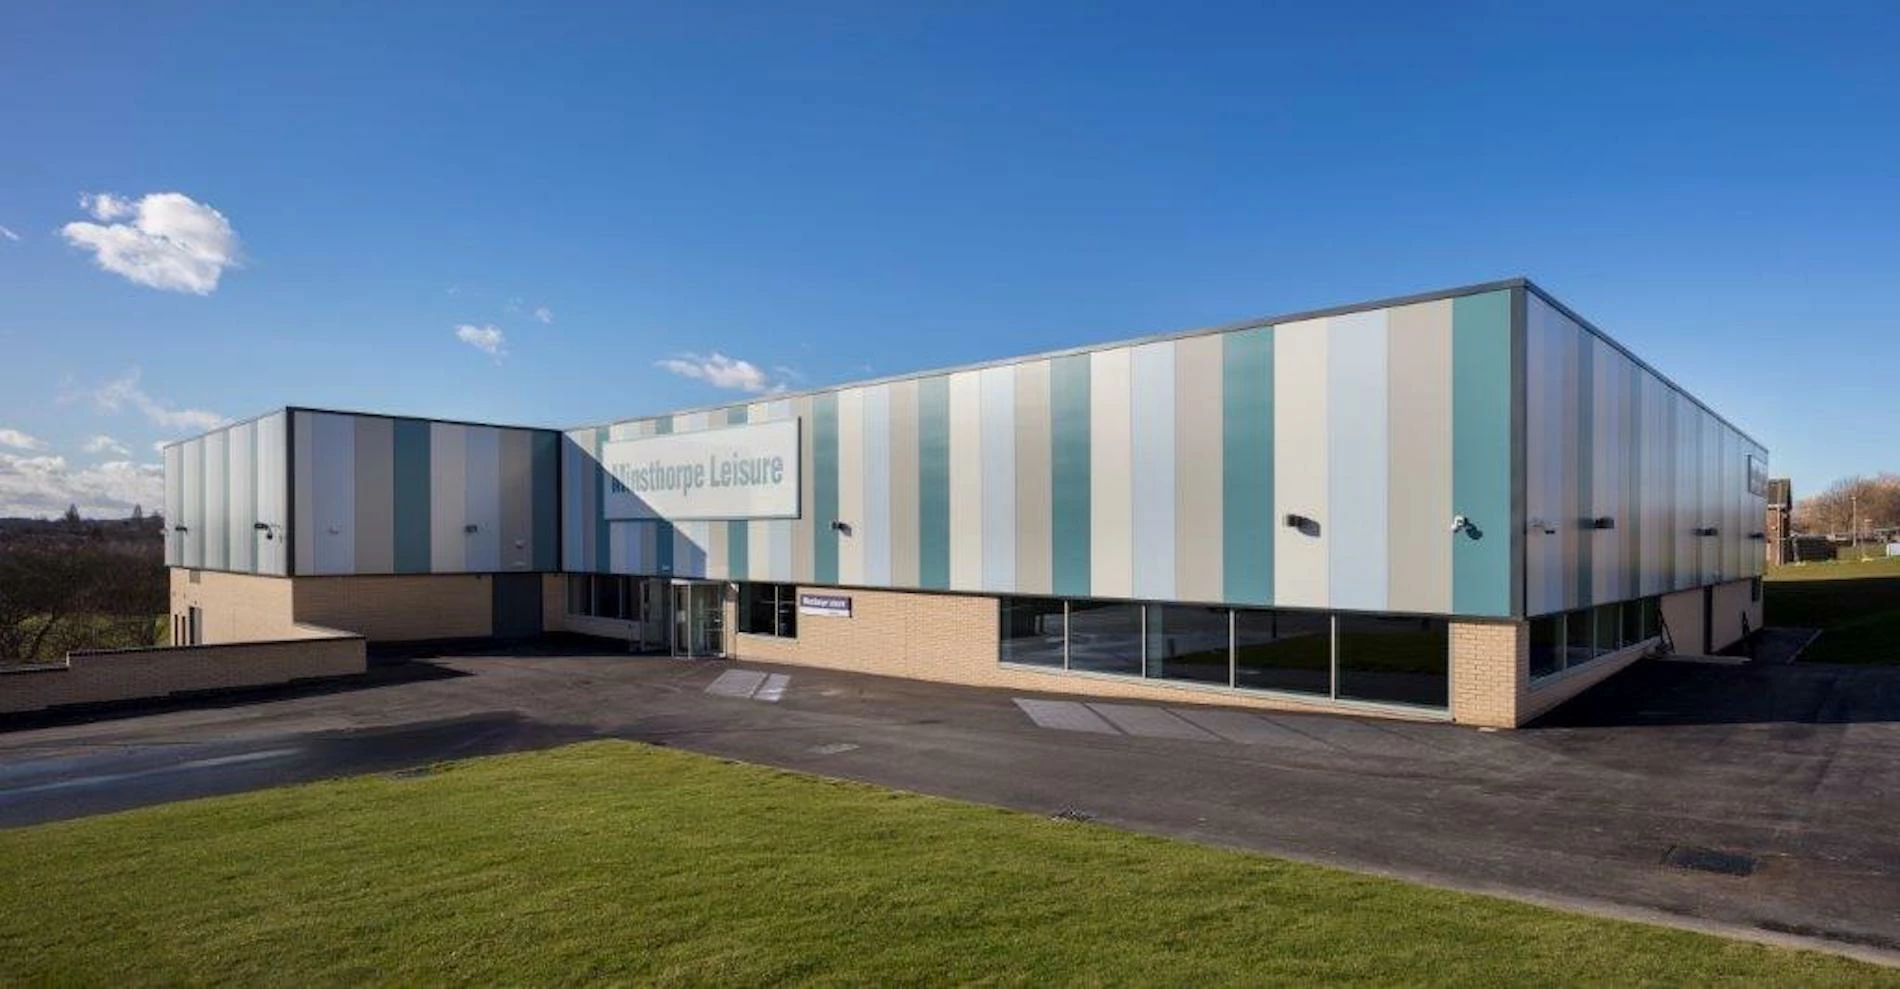 Minsthorpe Leisure centre, Wakefield, by Edge Structural Design.